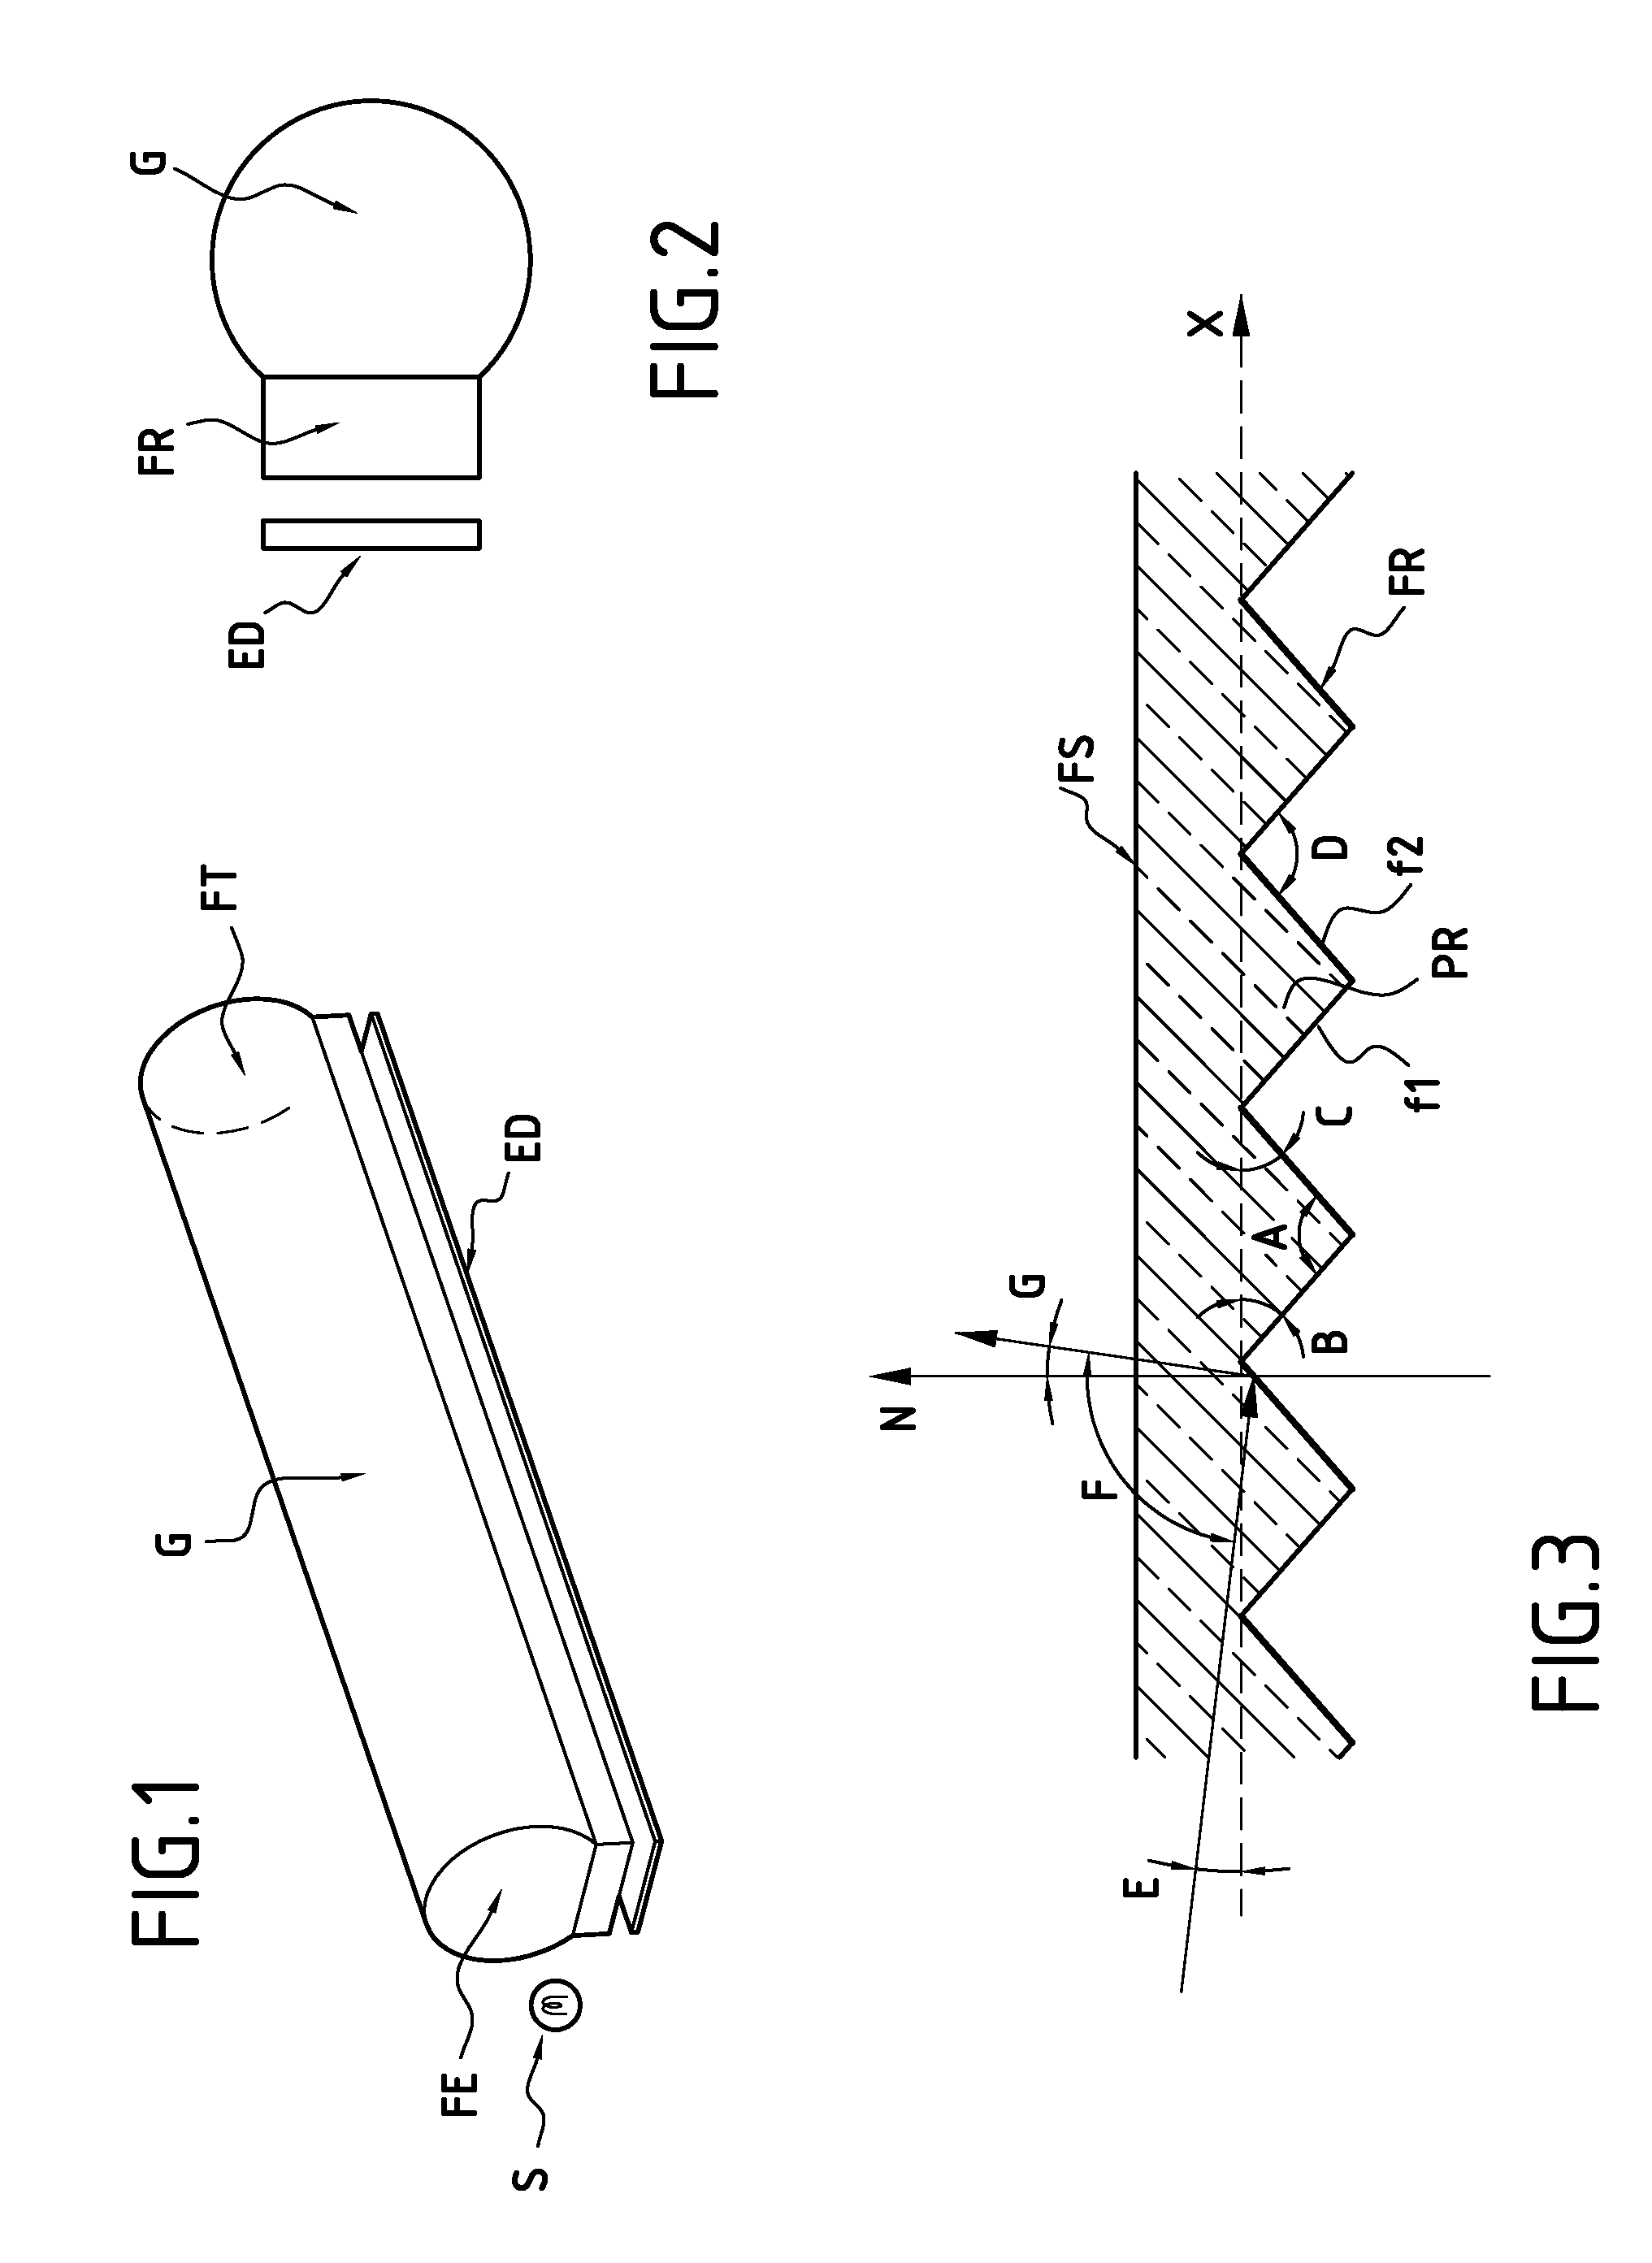 Lighting or signaling device with an optical guide for a motor vehicle